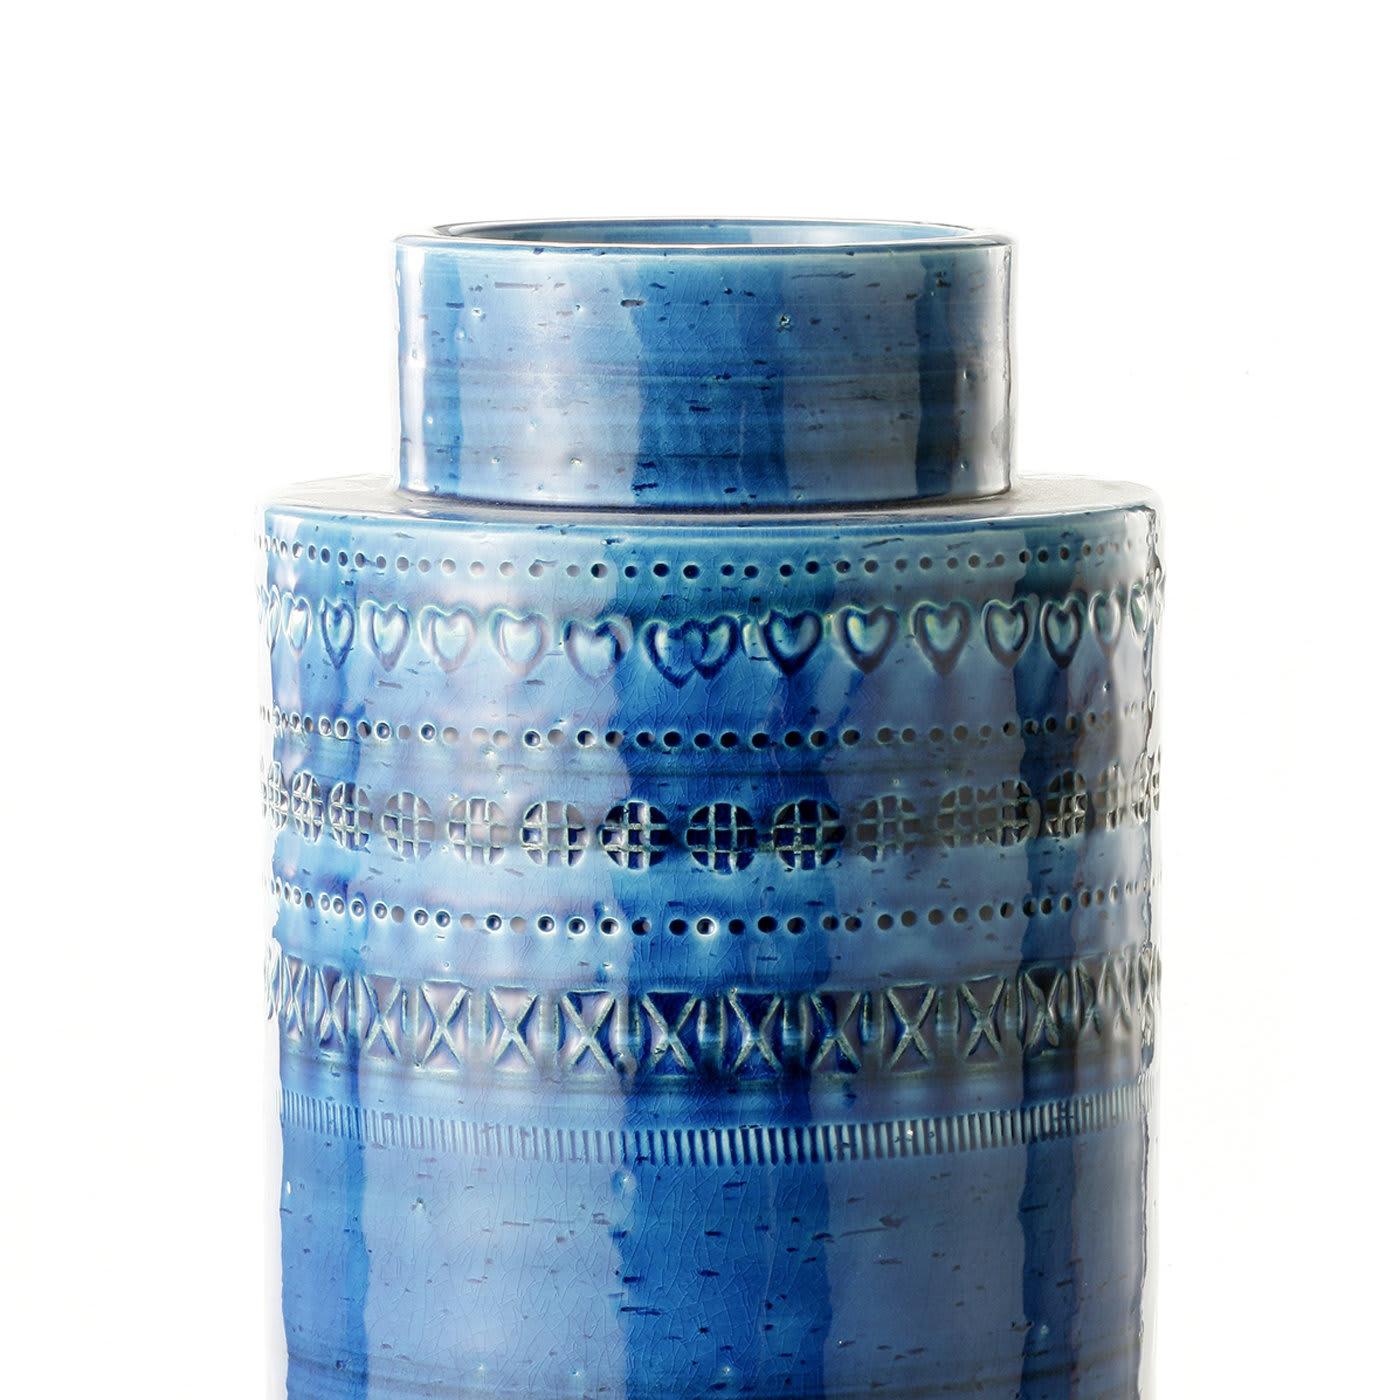 This exquisite small vase is in white clay with a striking turquoise finish. Its rectangular shape with a smaller base and top evokes the shape of a reel and features a series of parallel geometric carvings running all around its central body. This